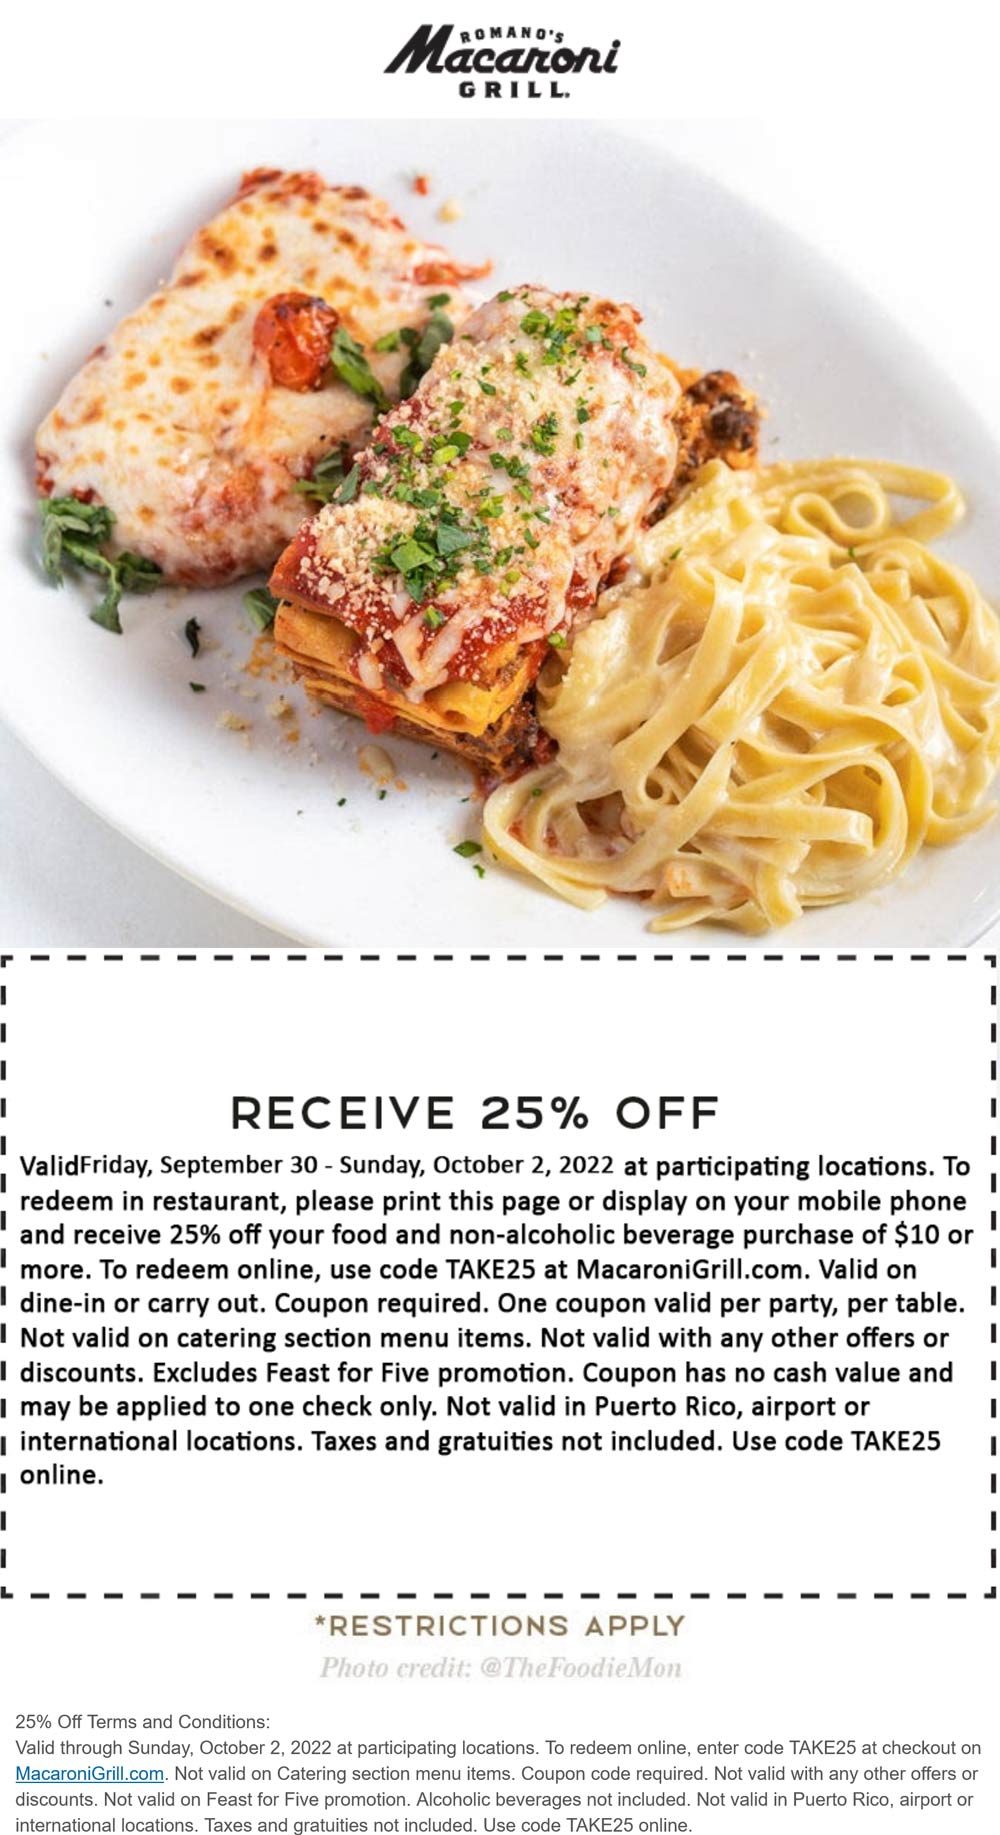 Macaroni Grill restaurants Coupon  25% off at Macaroni Grill restaurants, or online via promo code TAKE25 #macaronigrill 